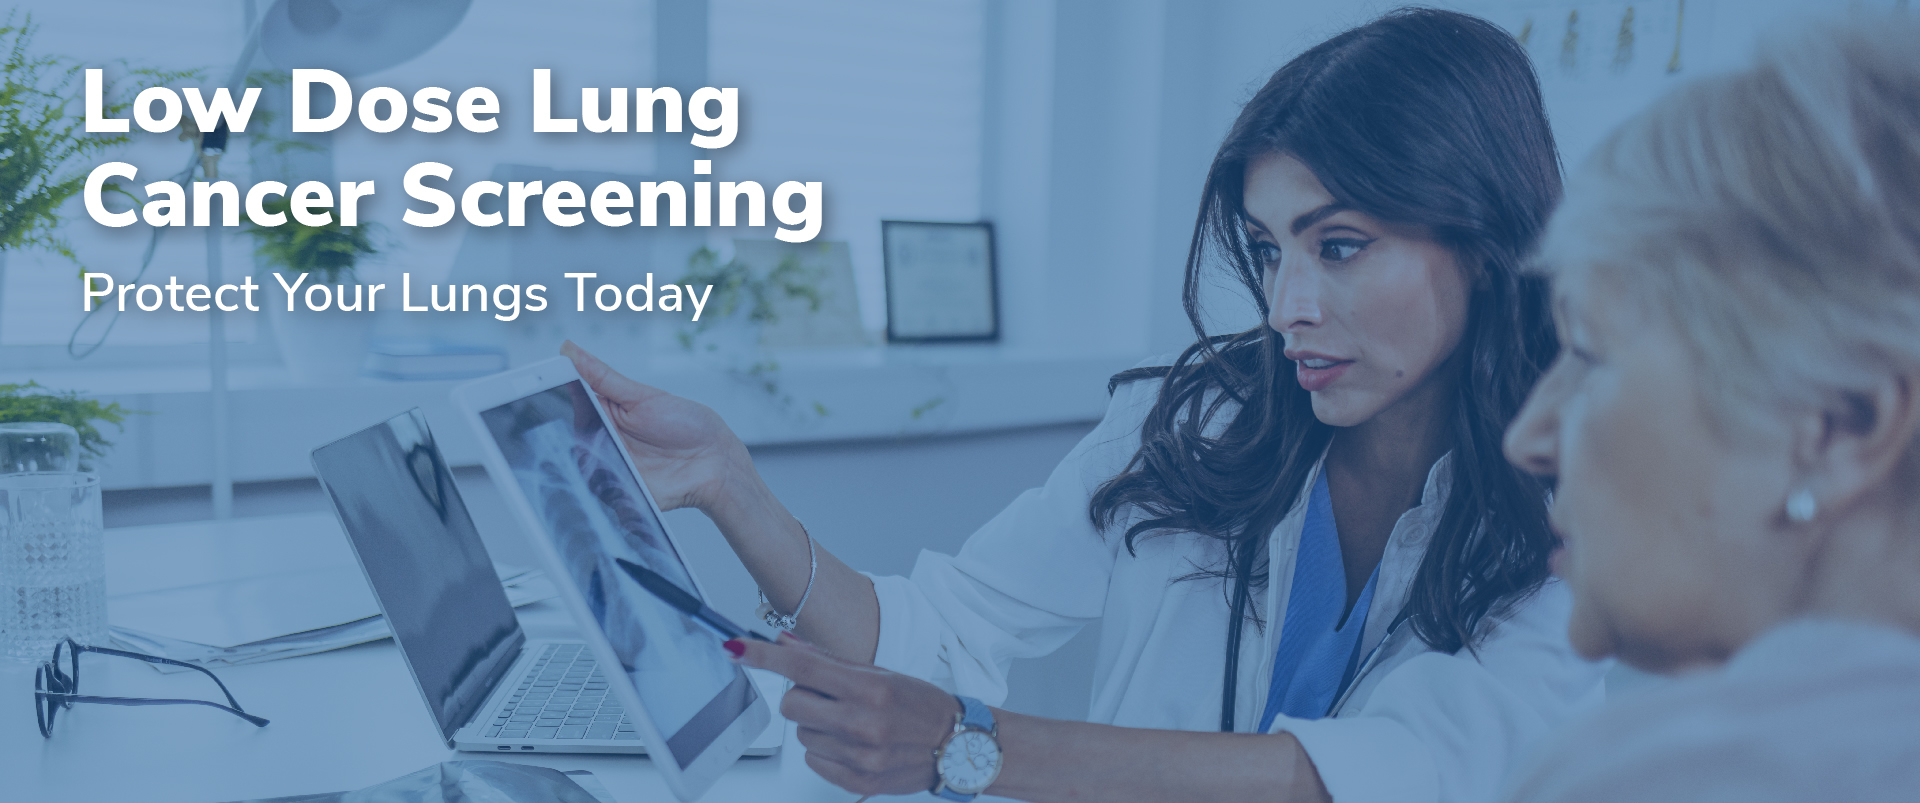 March Lung Cancer Screening